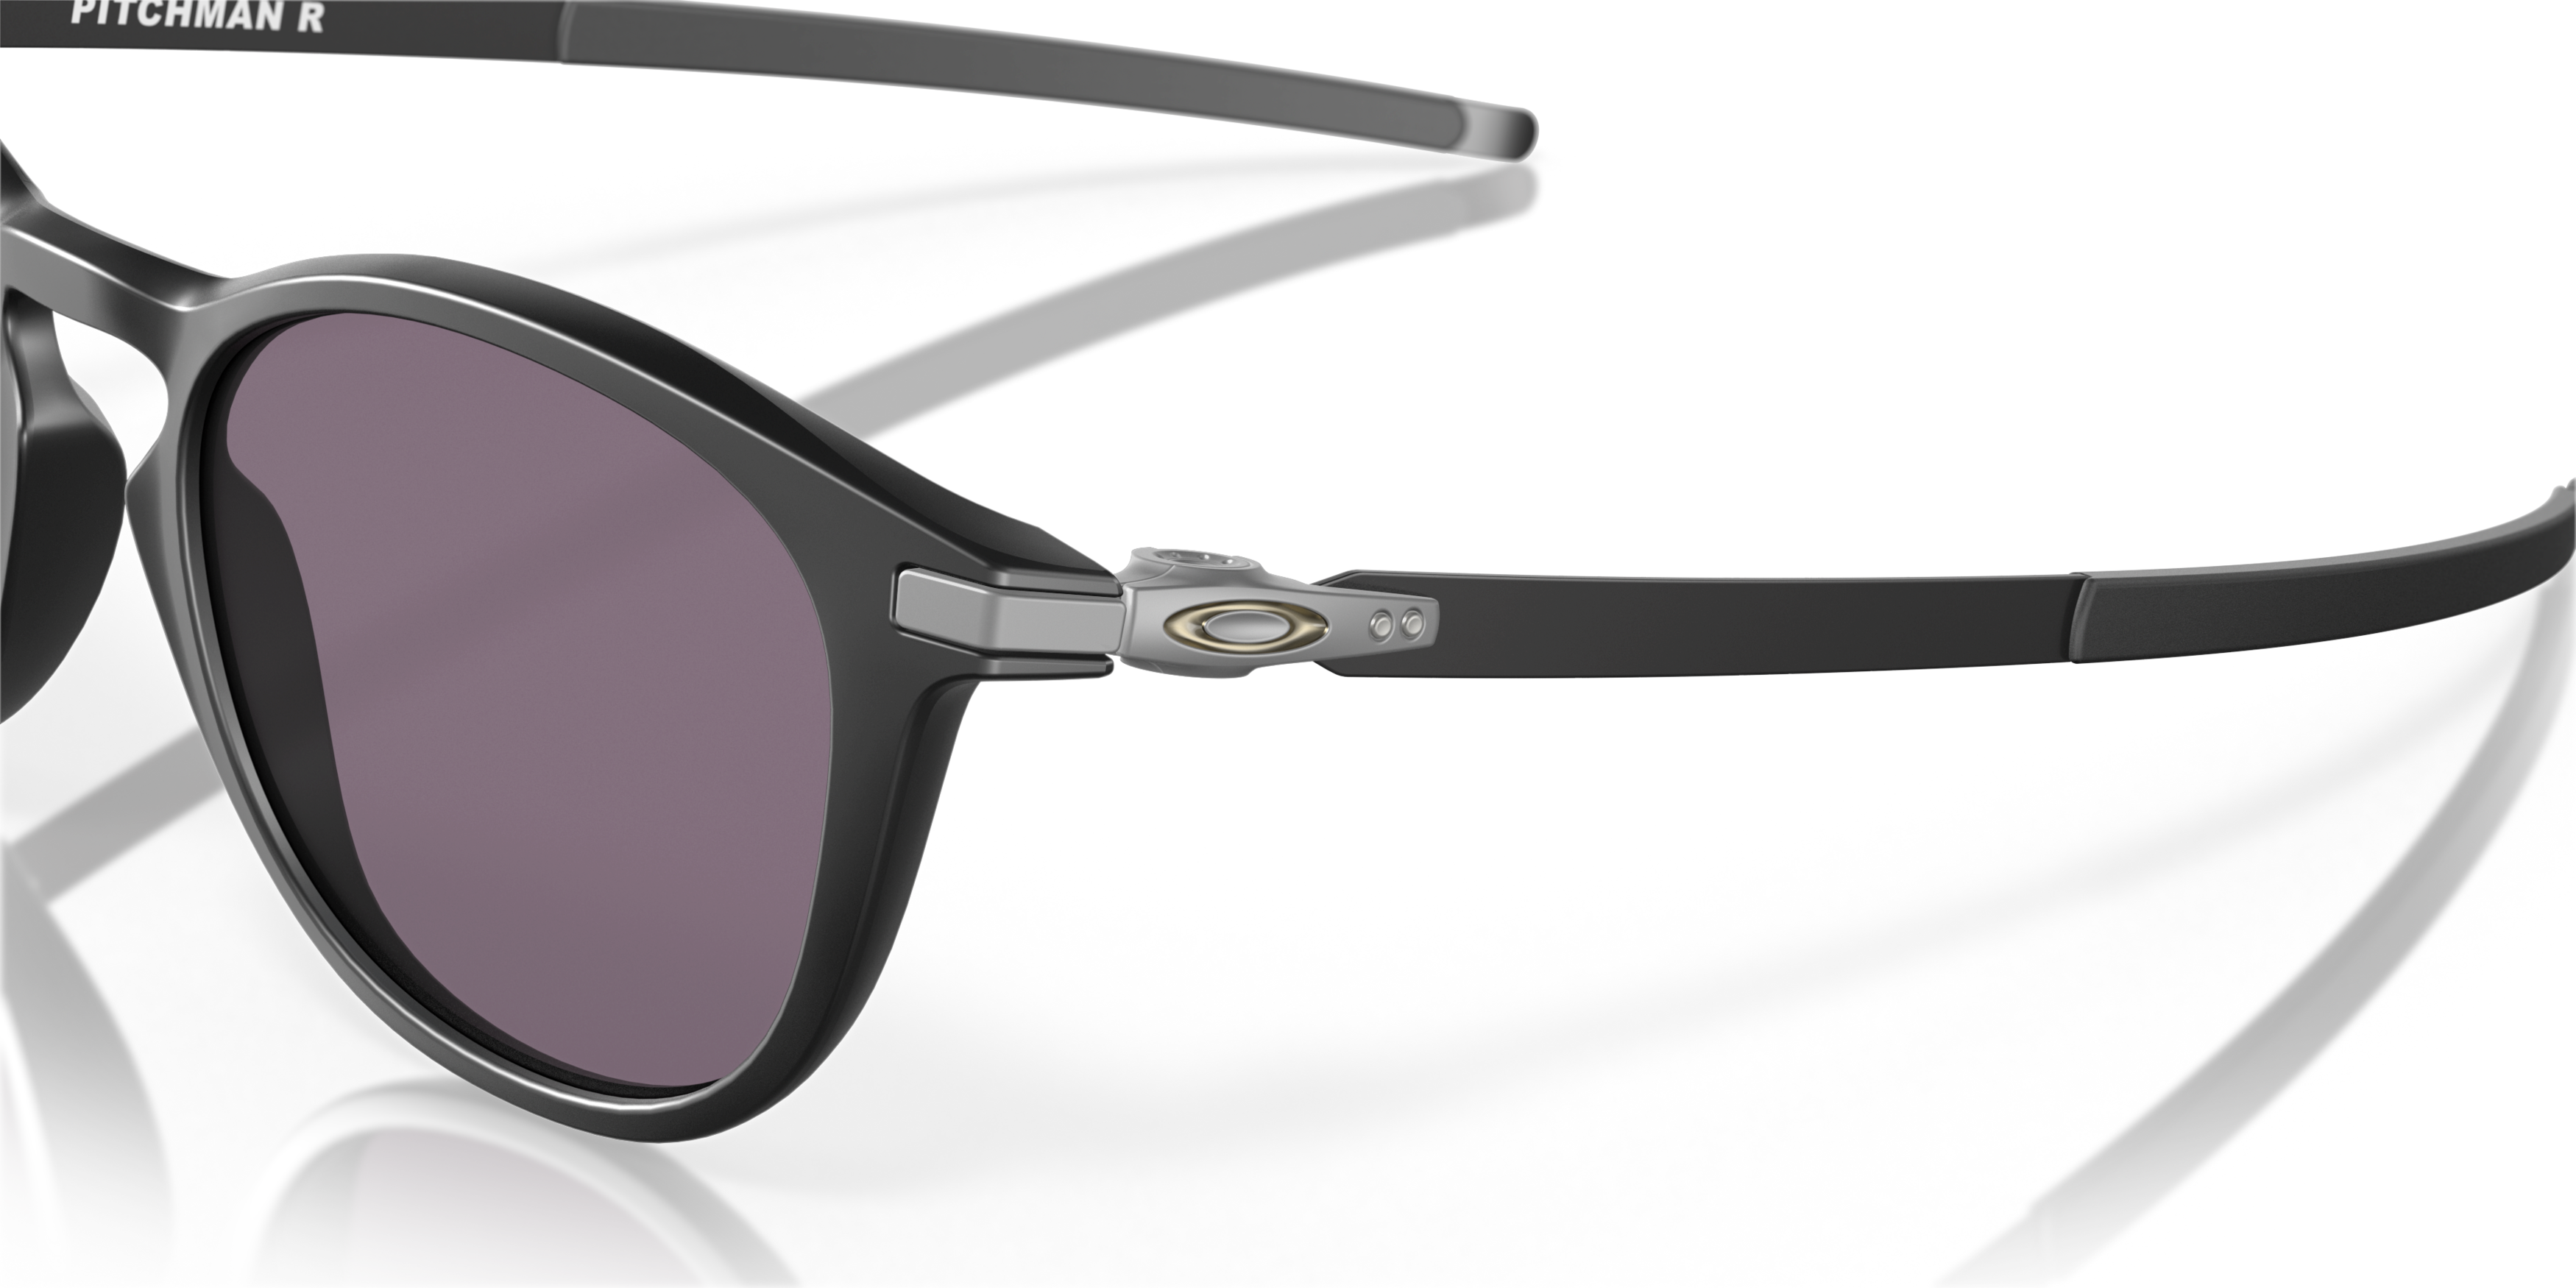 [products.image.detail01] Oakley Pitchman R OO9439 0150